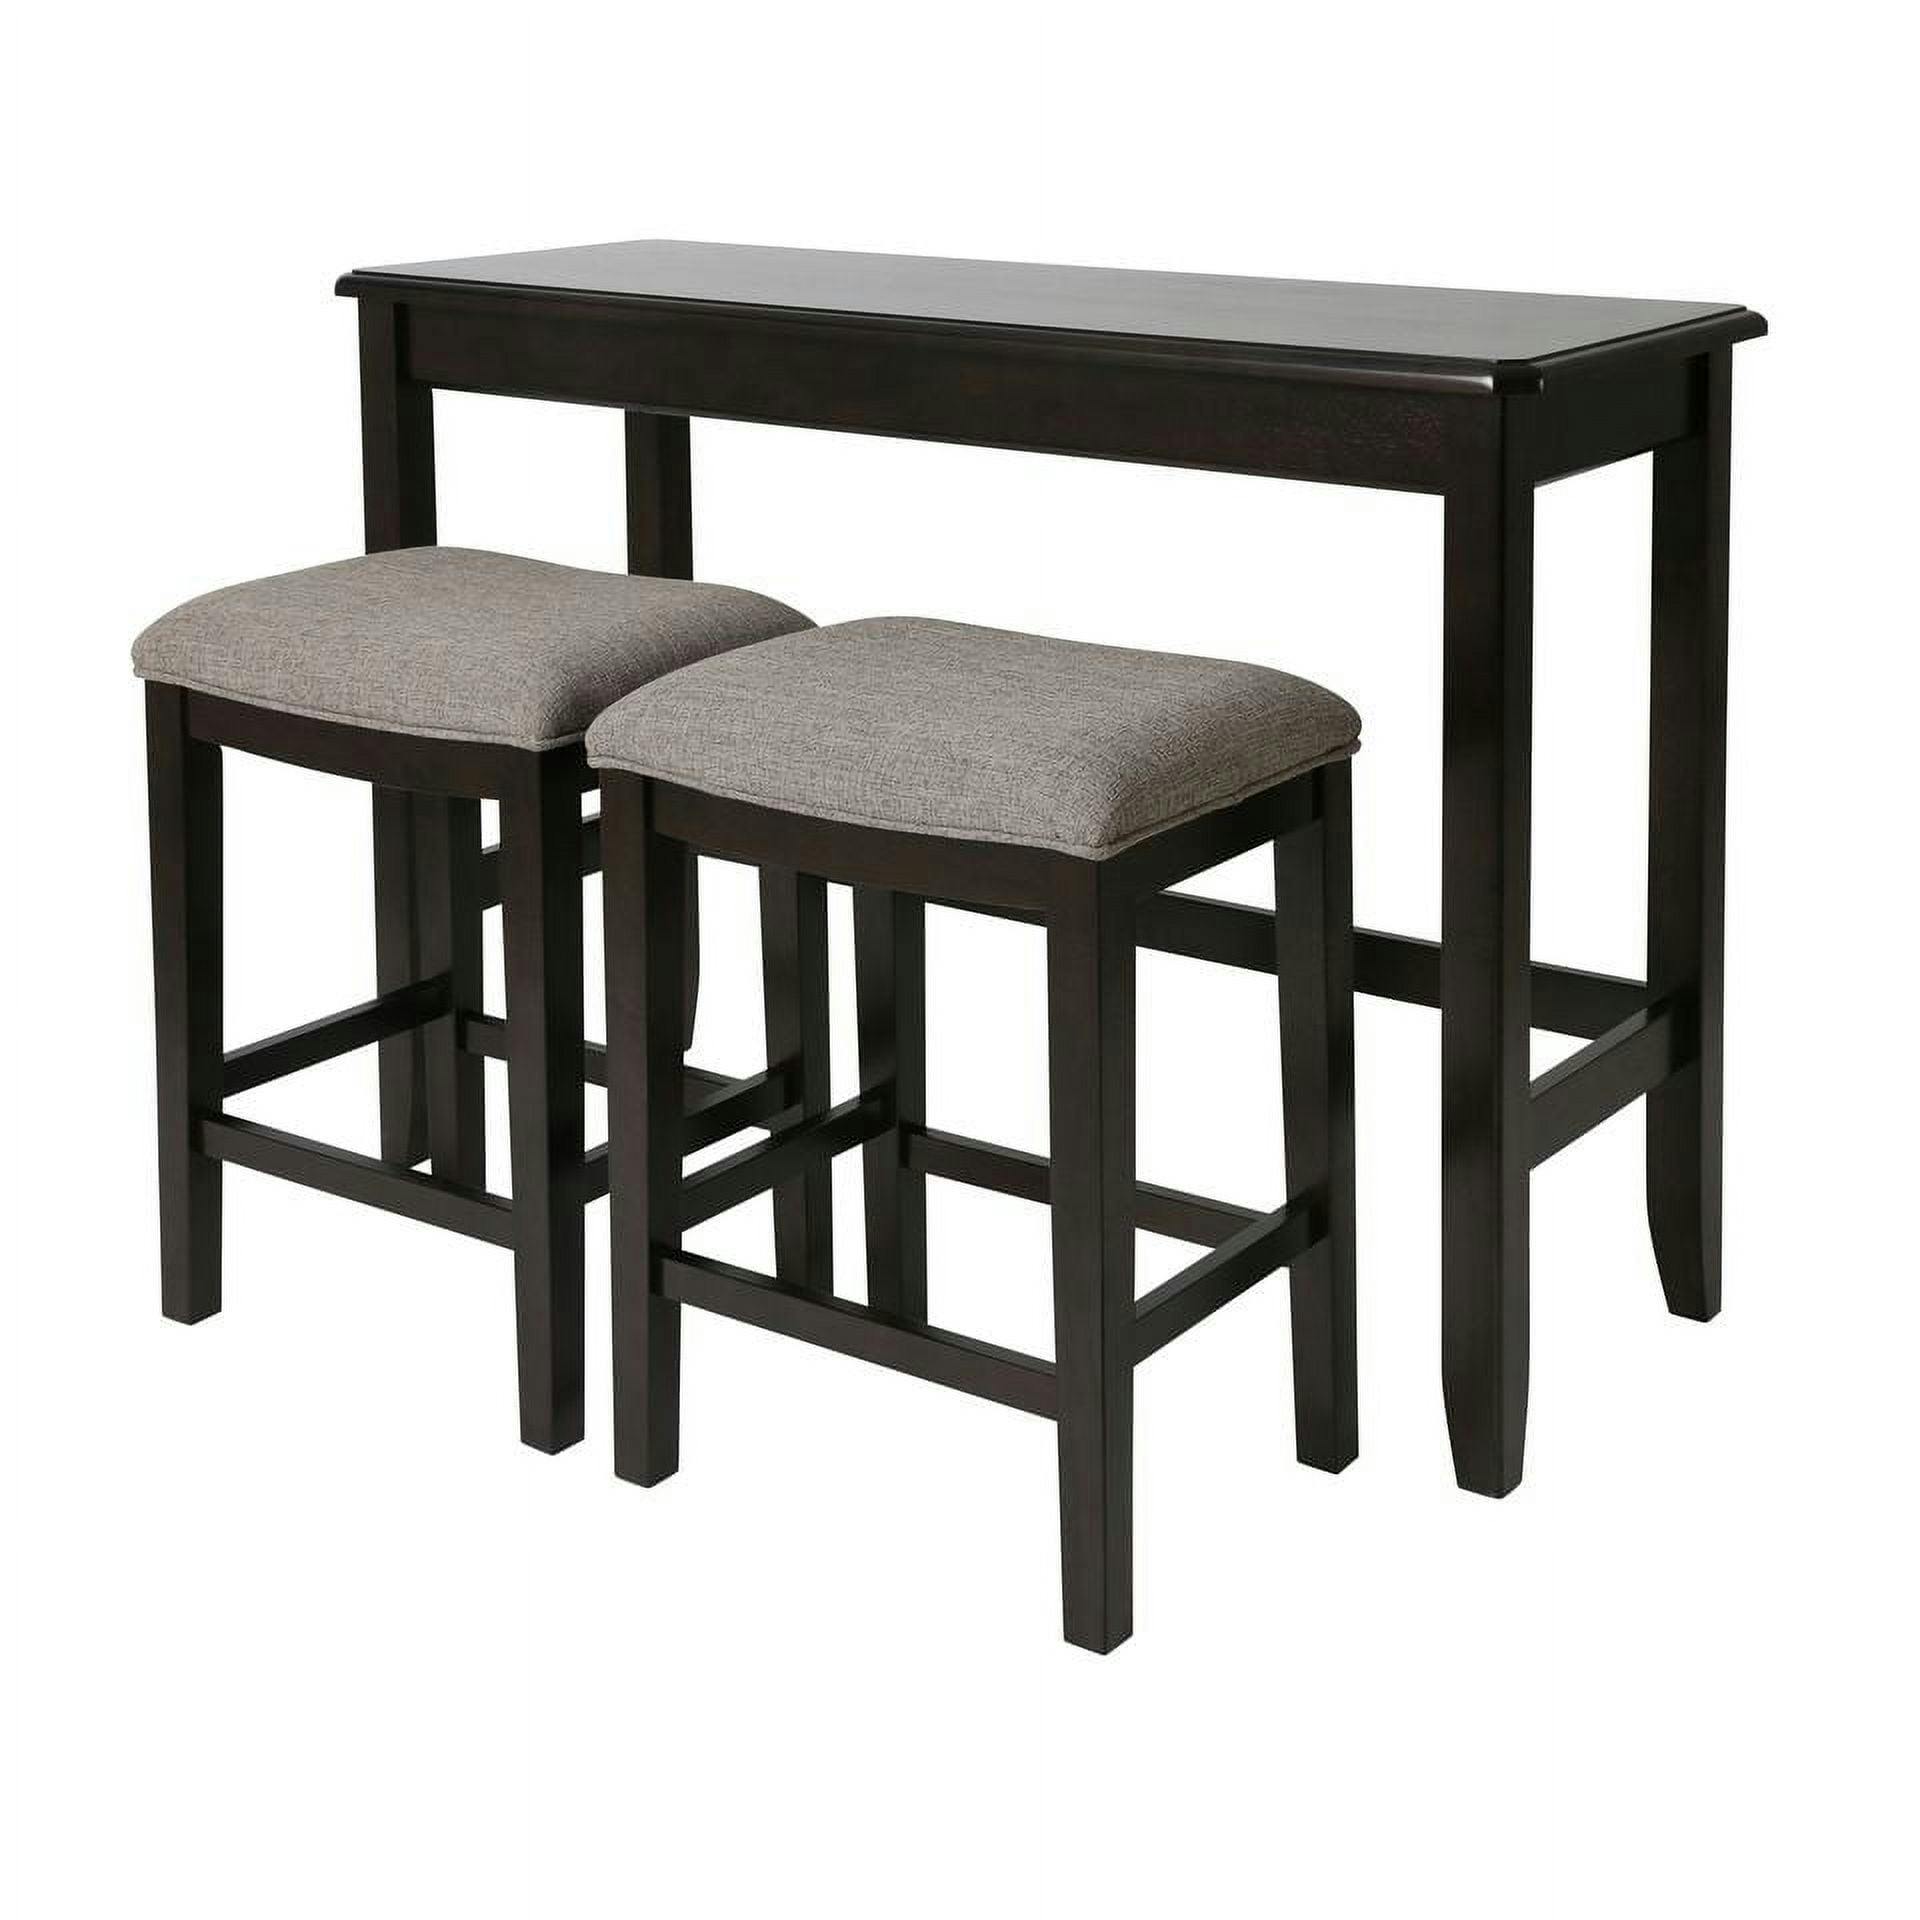 Espresso Solid Pine Sofa Table and Stools Set